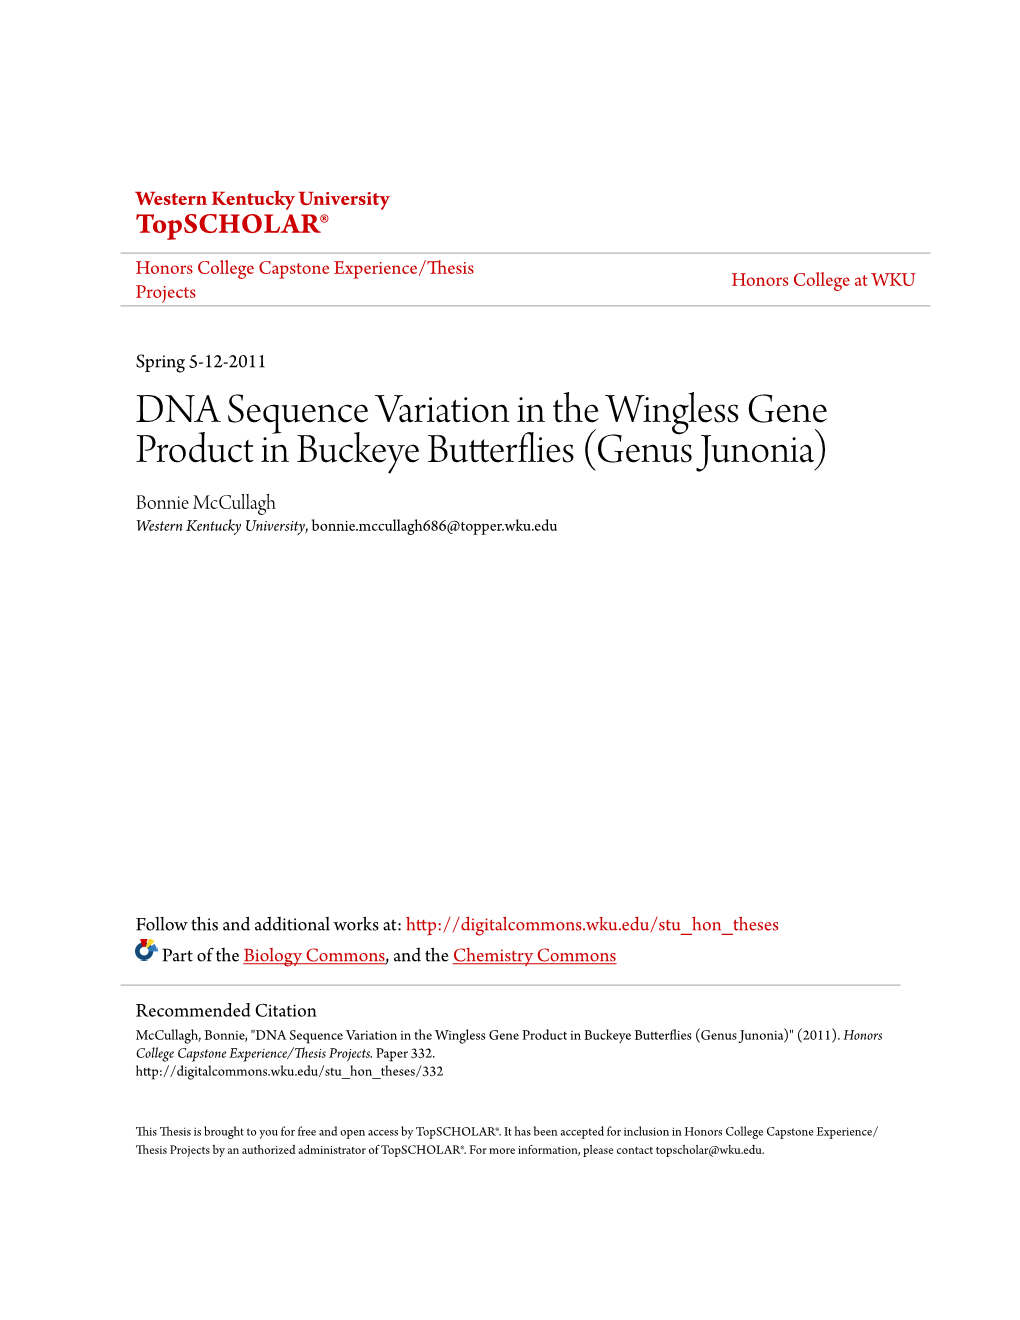 DNA Sequence Variation in the Wingless Gene Product in Buckeye